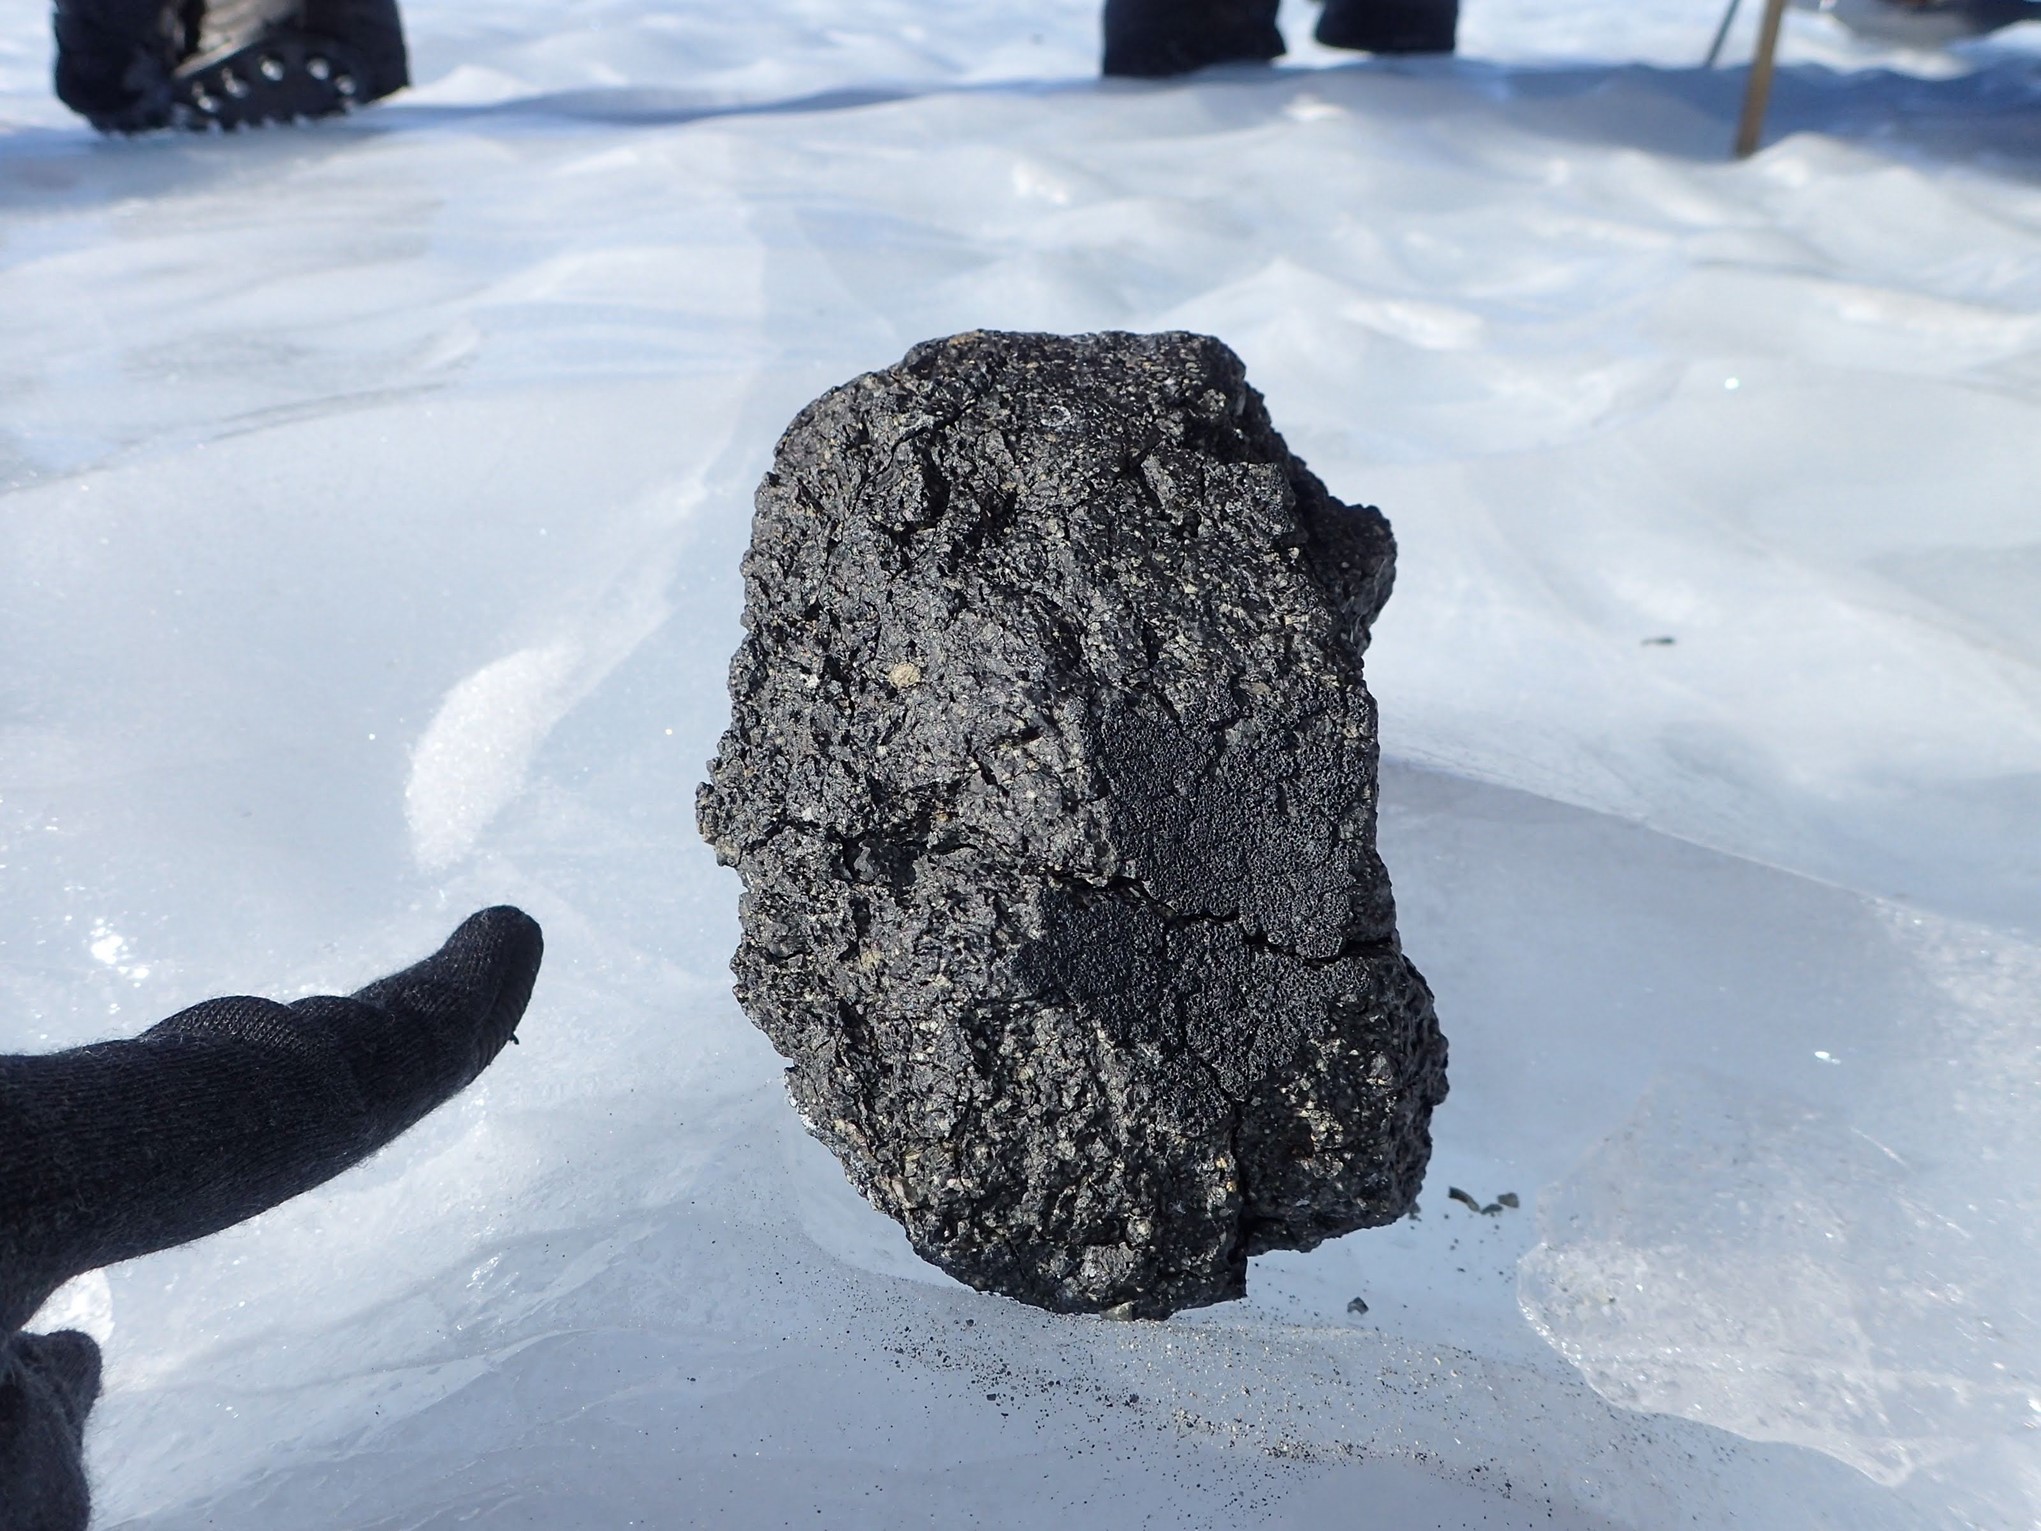 A chunky meteorite on the blue-ice at DW.